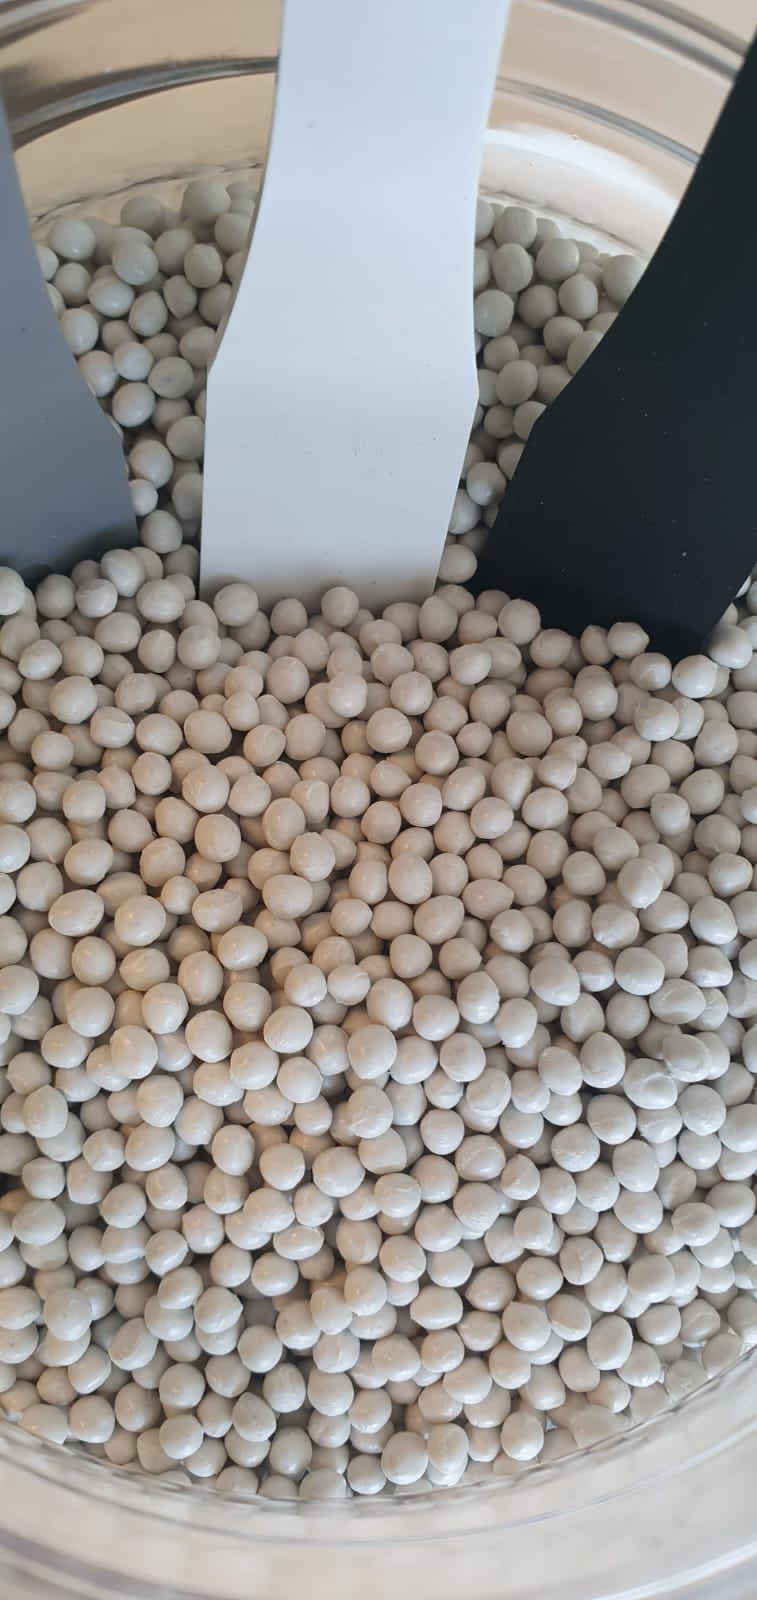 High Impact Polystyrene - PS Regranulate  trading company